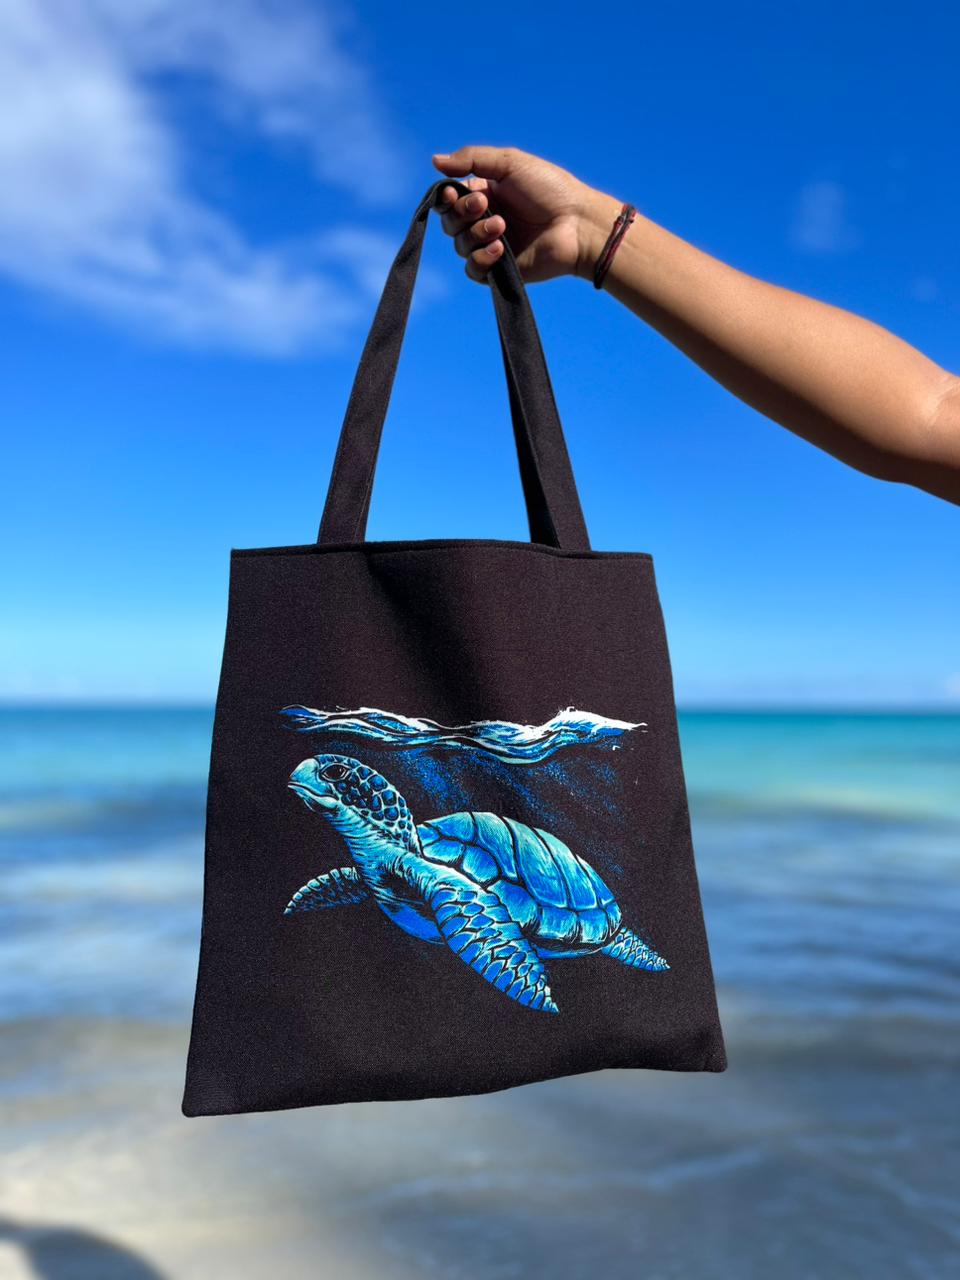 A person is holding a black tote bag with a vibrant blue turtle design on it, with a beach and clear blue sky in the background.